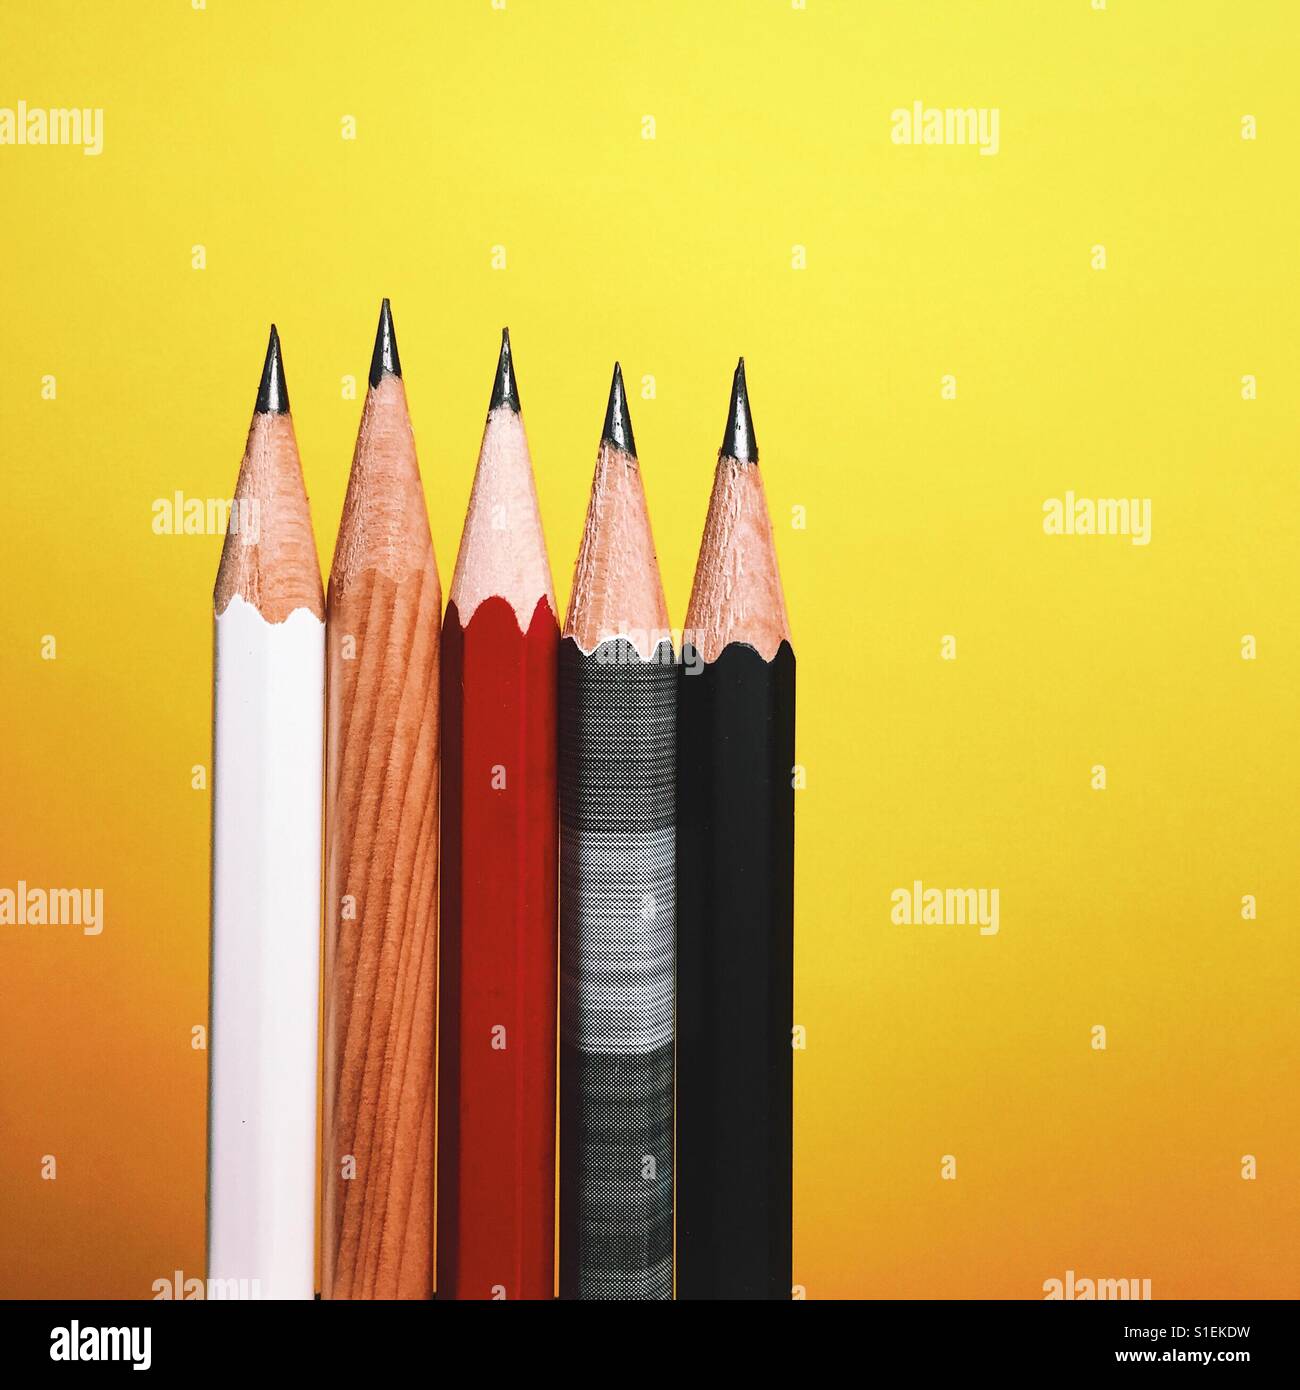 A close-up shot of five different and newly sharpened pencils against a bright yellow background. Stock Photo